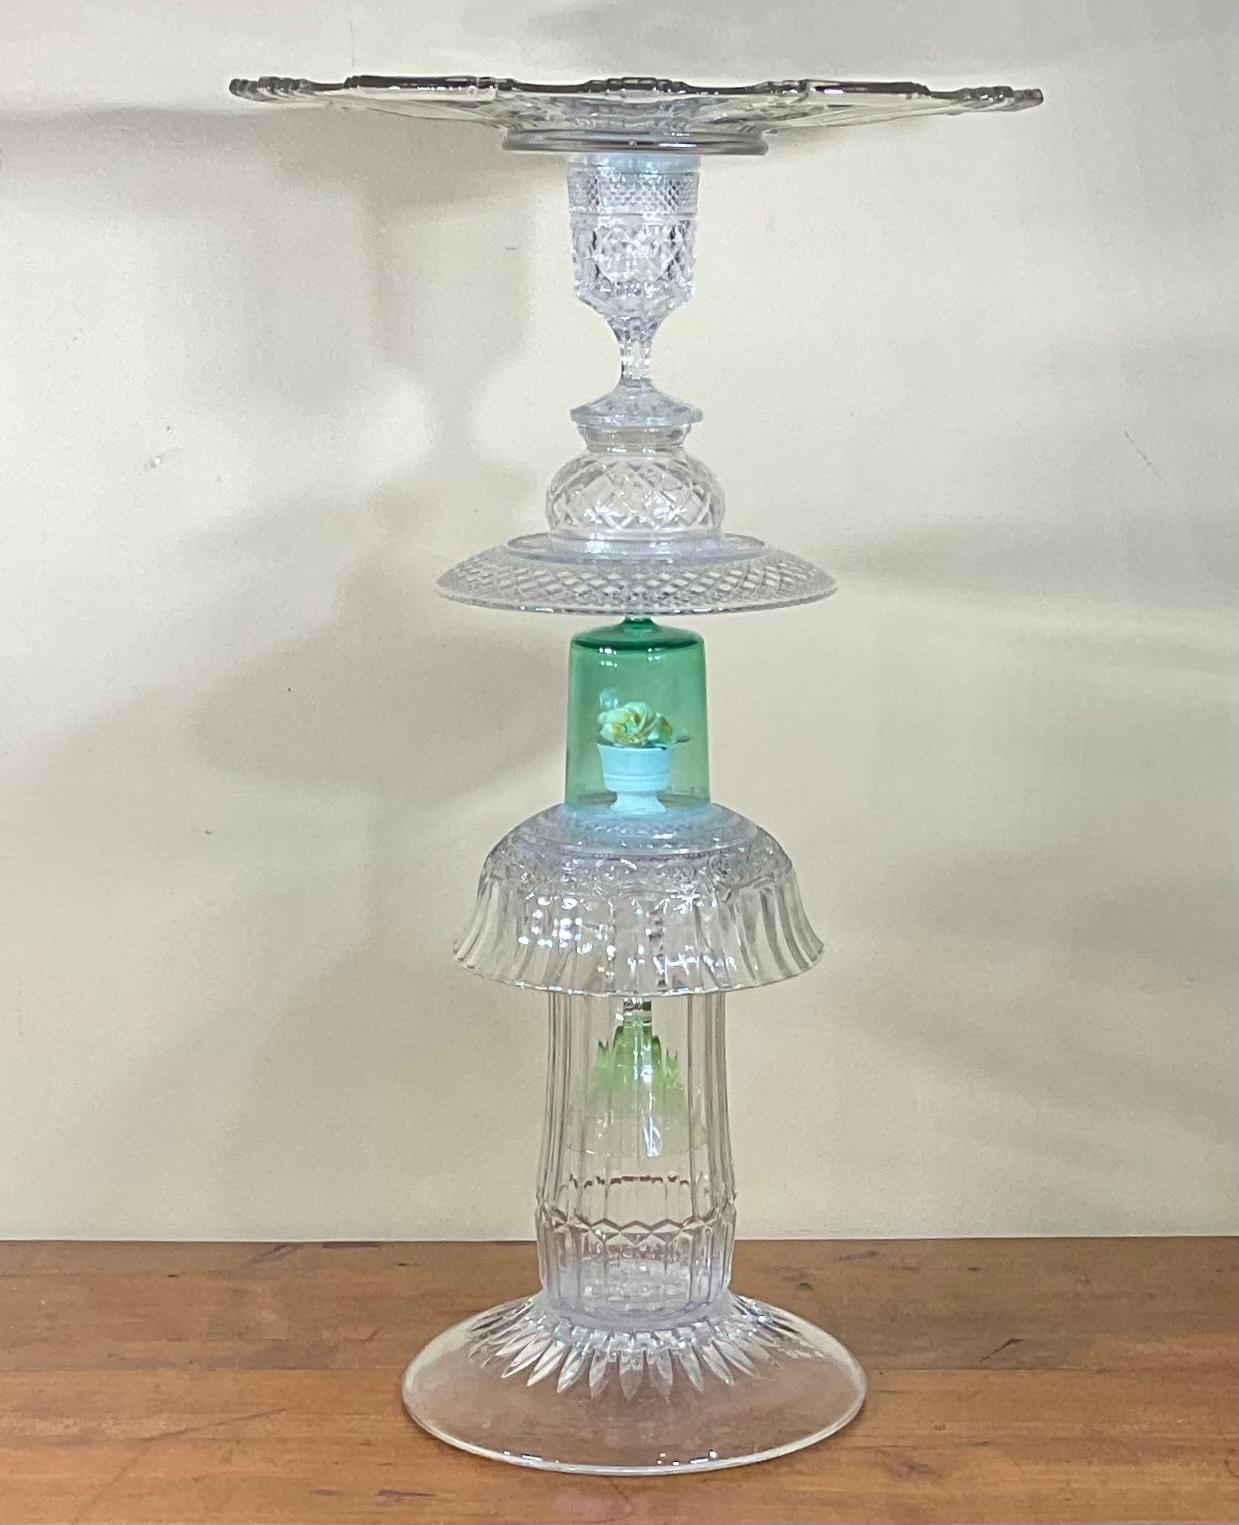 Glass table artistically made of combination of vintage art glass ,cut glass ,press glass and porcelain flower , put together to be beautiful table for use in display or use in any fancy occasion.